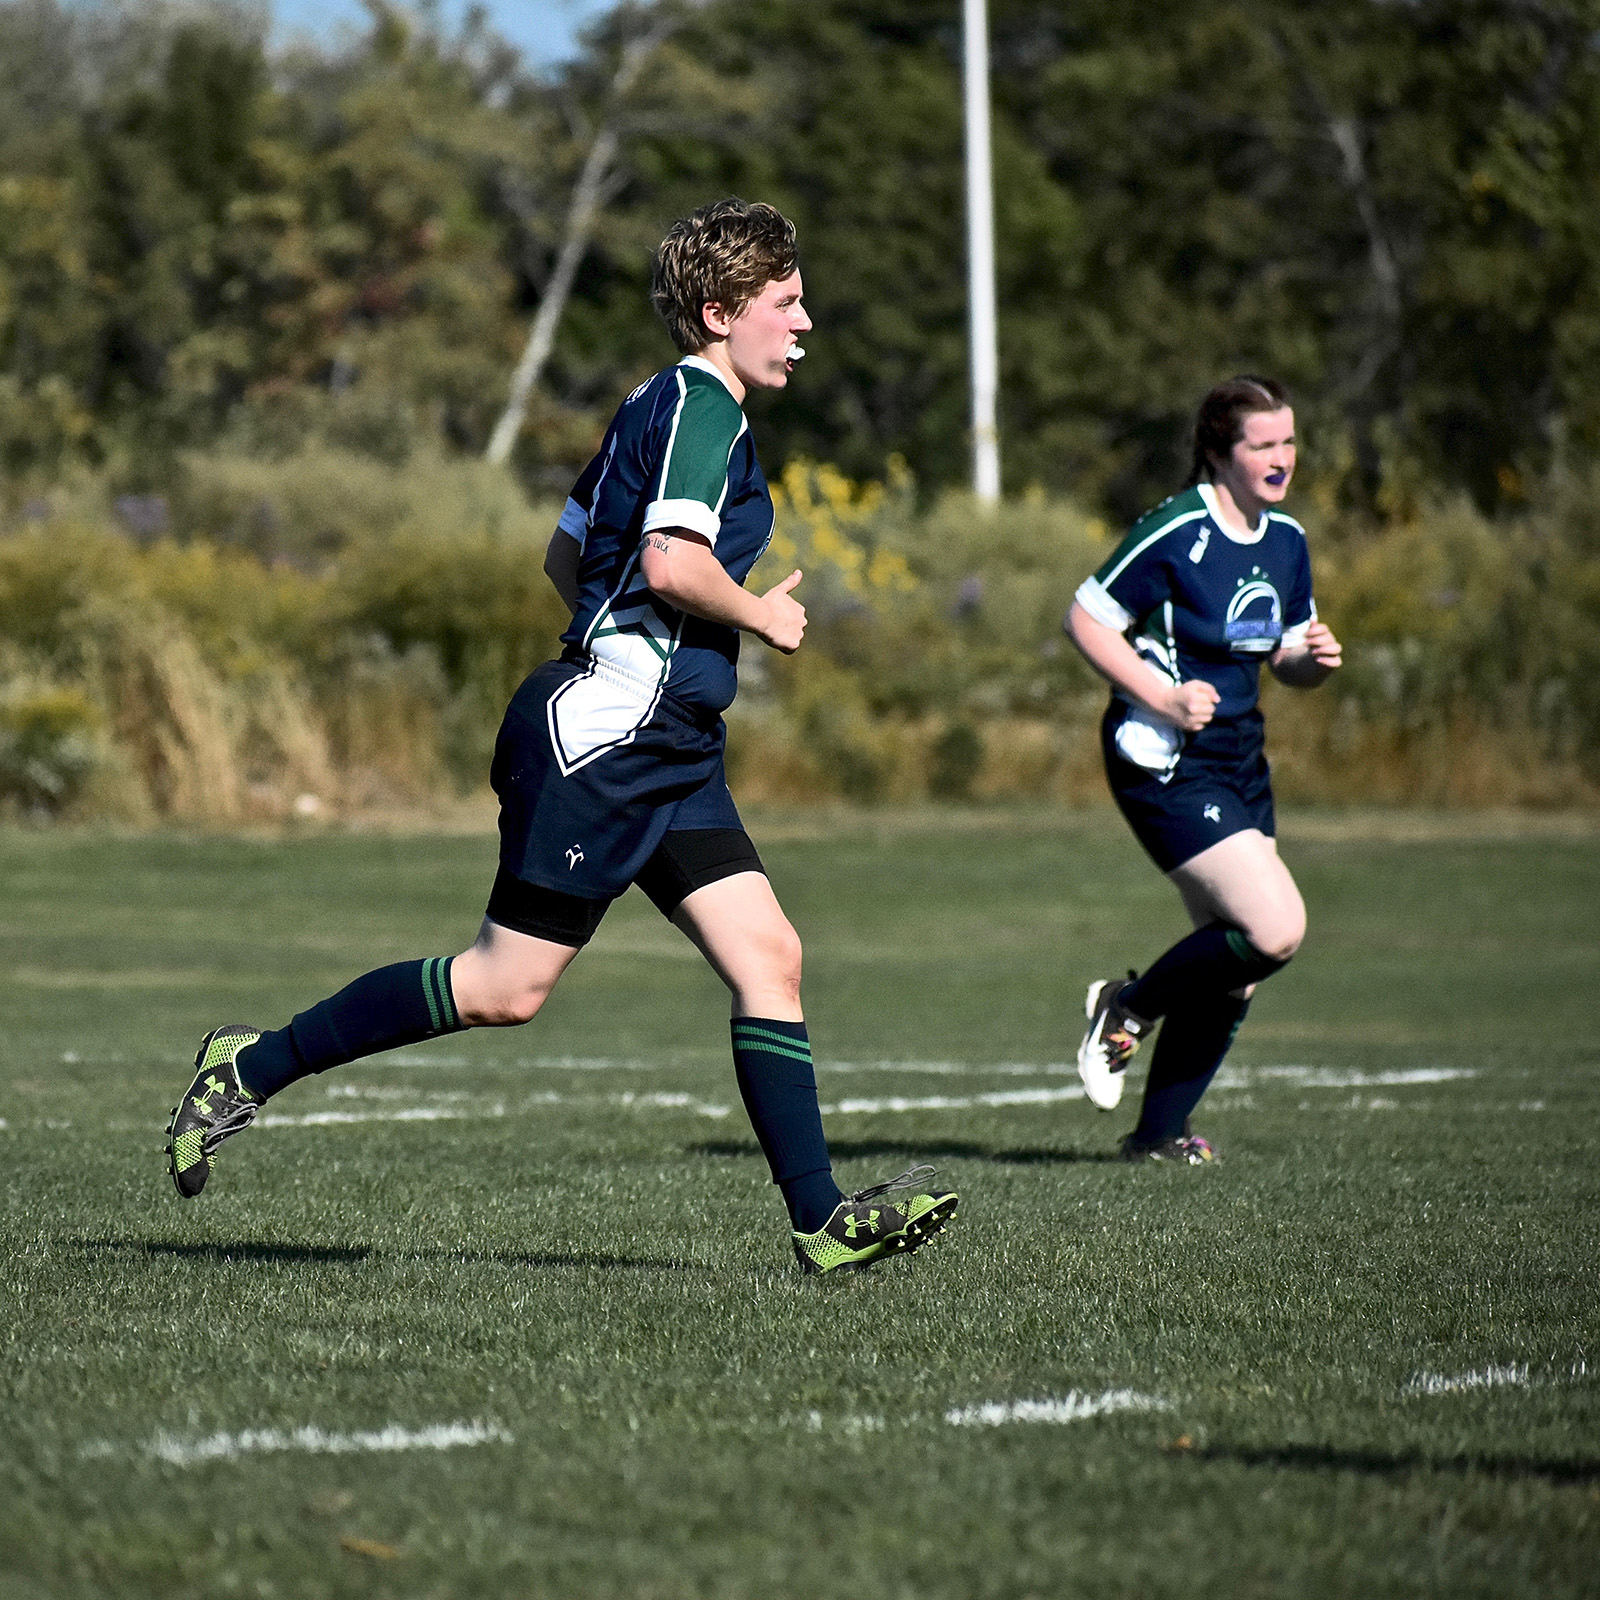 two rugby players running across grass